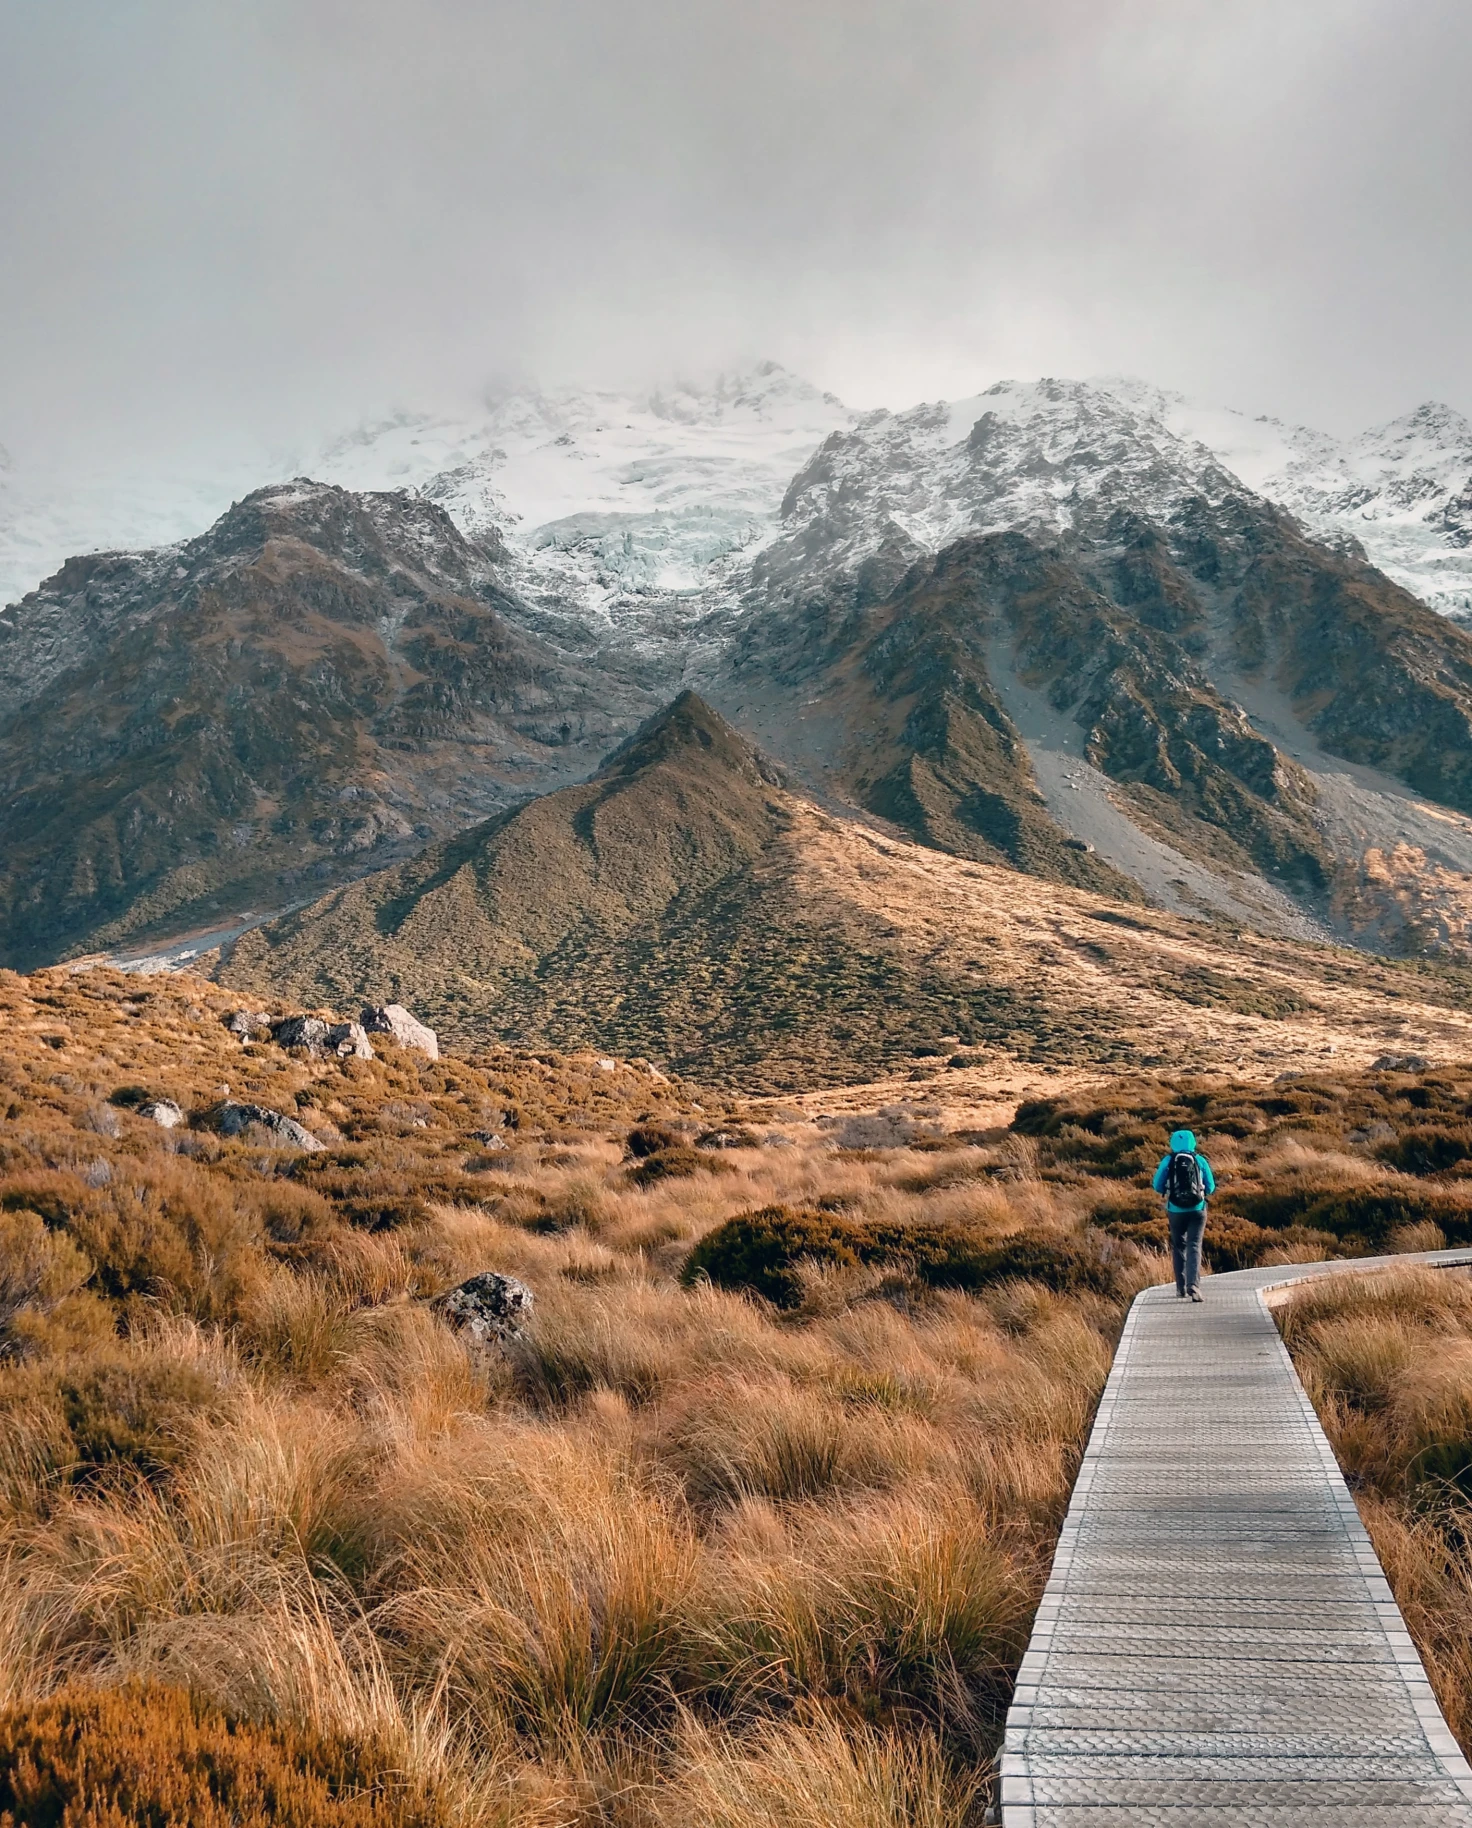 Person walking on wood path next to valley and snow-covered mountains